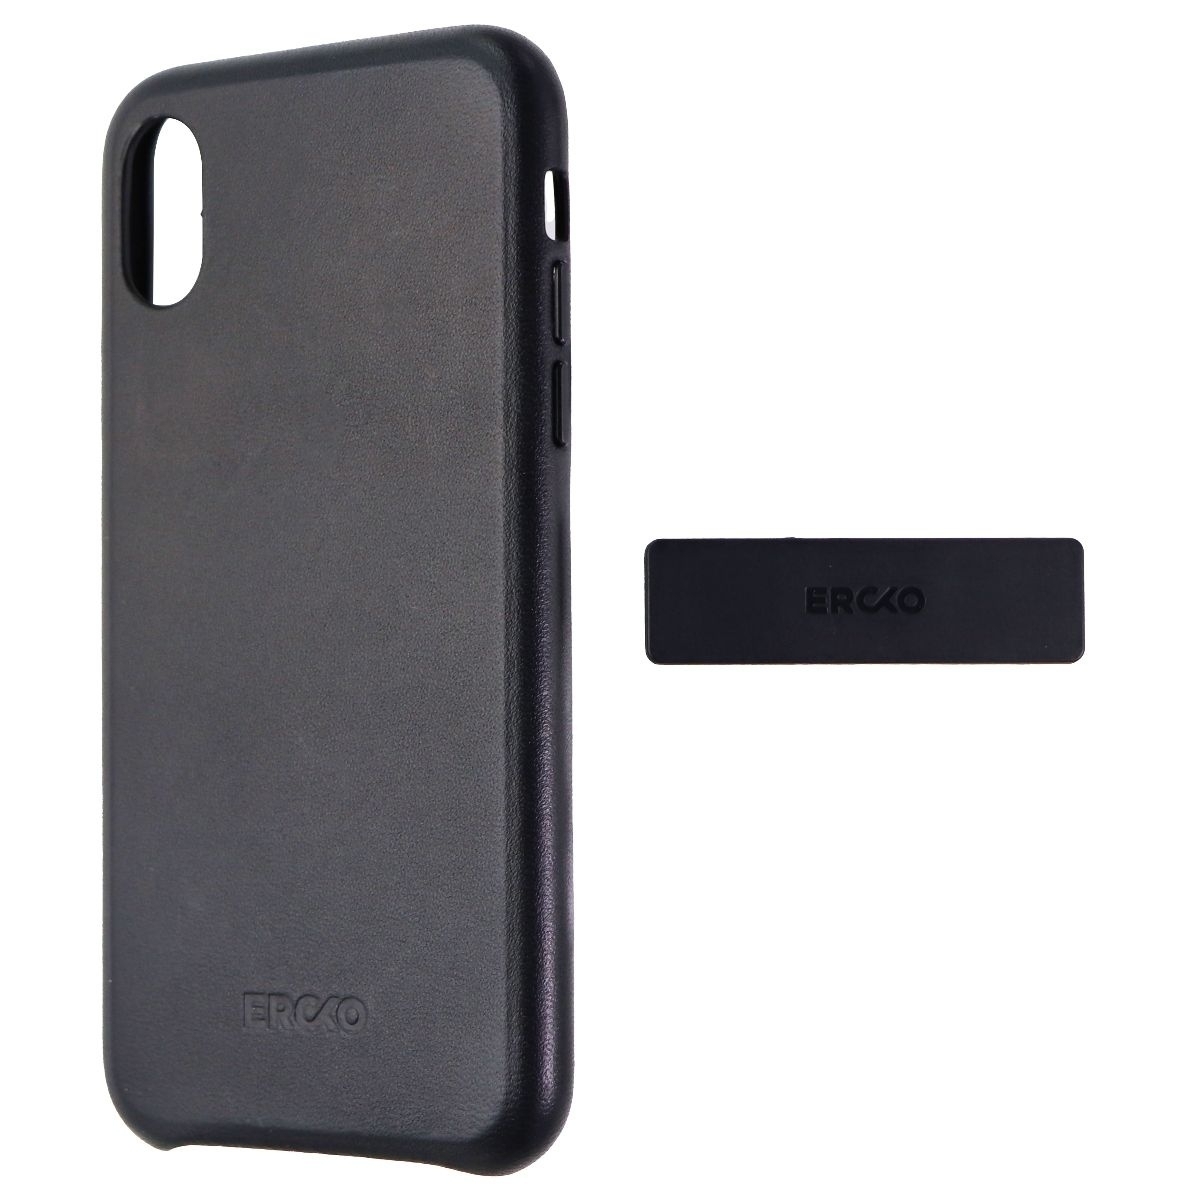 Ercko Leather Hard Case & Small Magnet Holder For IPhone XS / X - Black